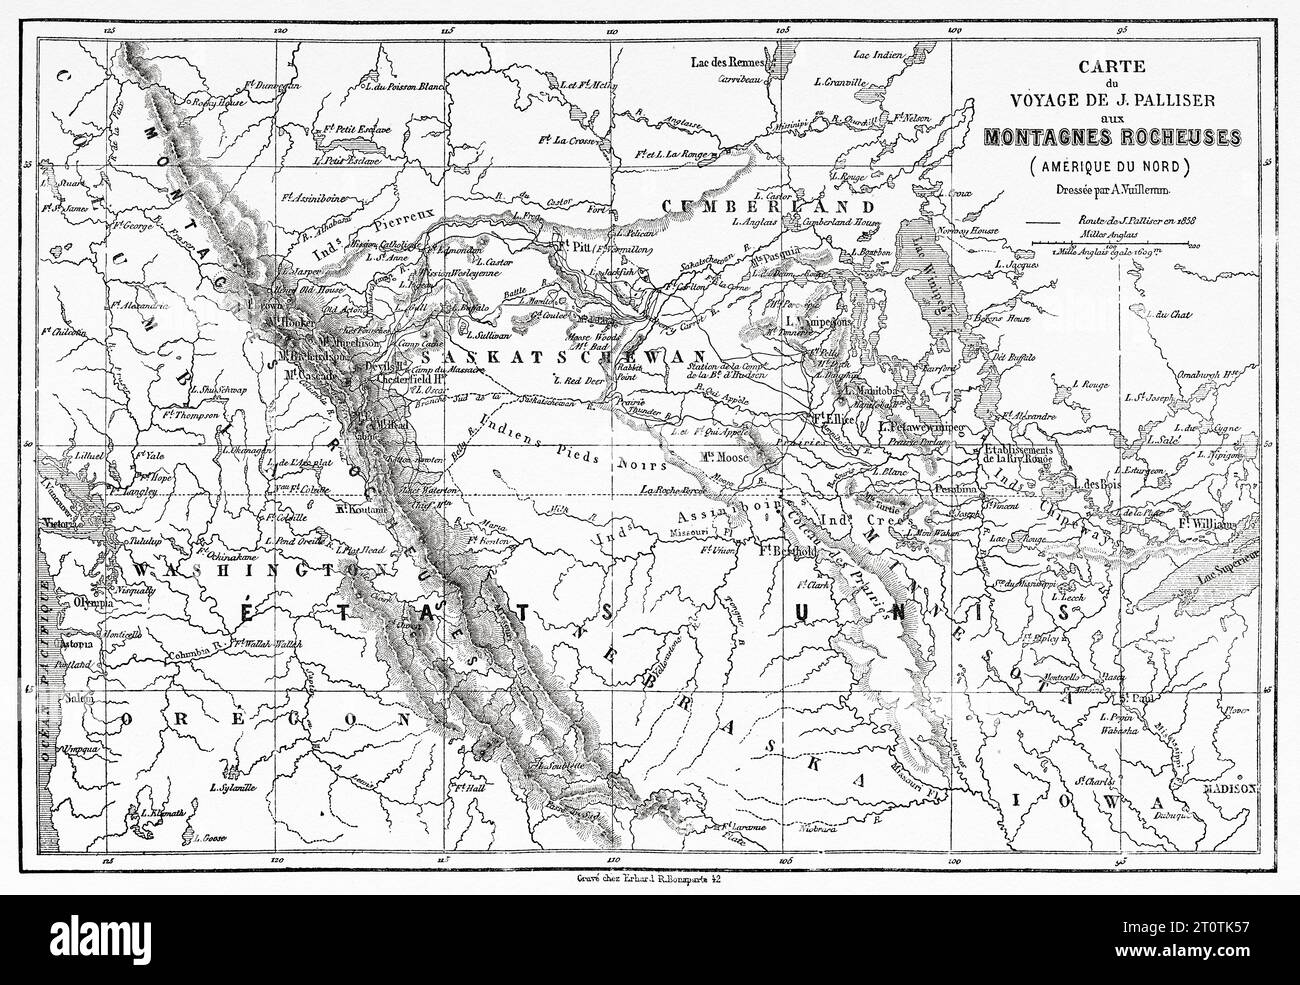 J Palliser's Rocky Mountains Travel Map, USA. Exploration of the Rocky Mountains in 1857-1859 by Captain John Palliser. Old 19th century engraving from Le Tour du Monde 1860 Stock Photo